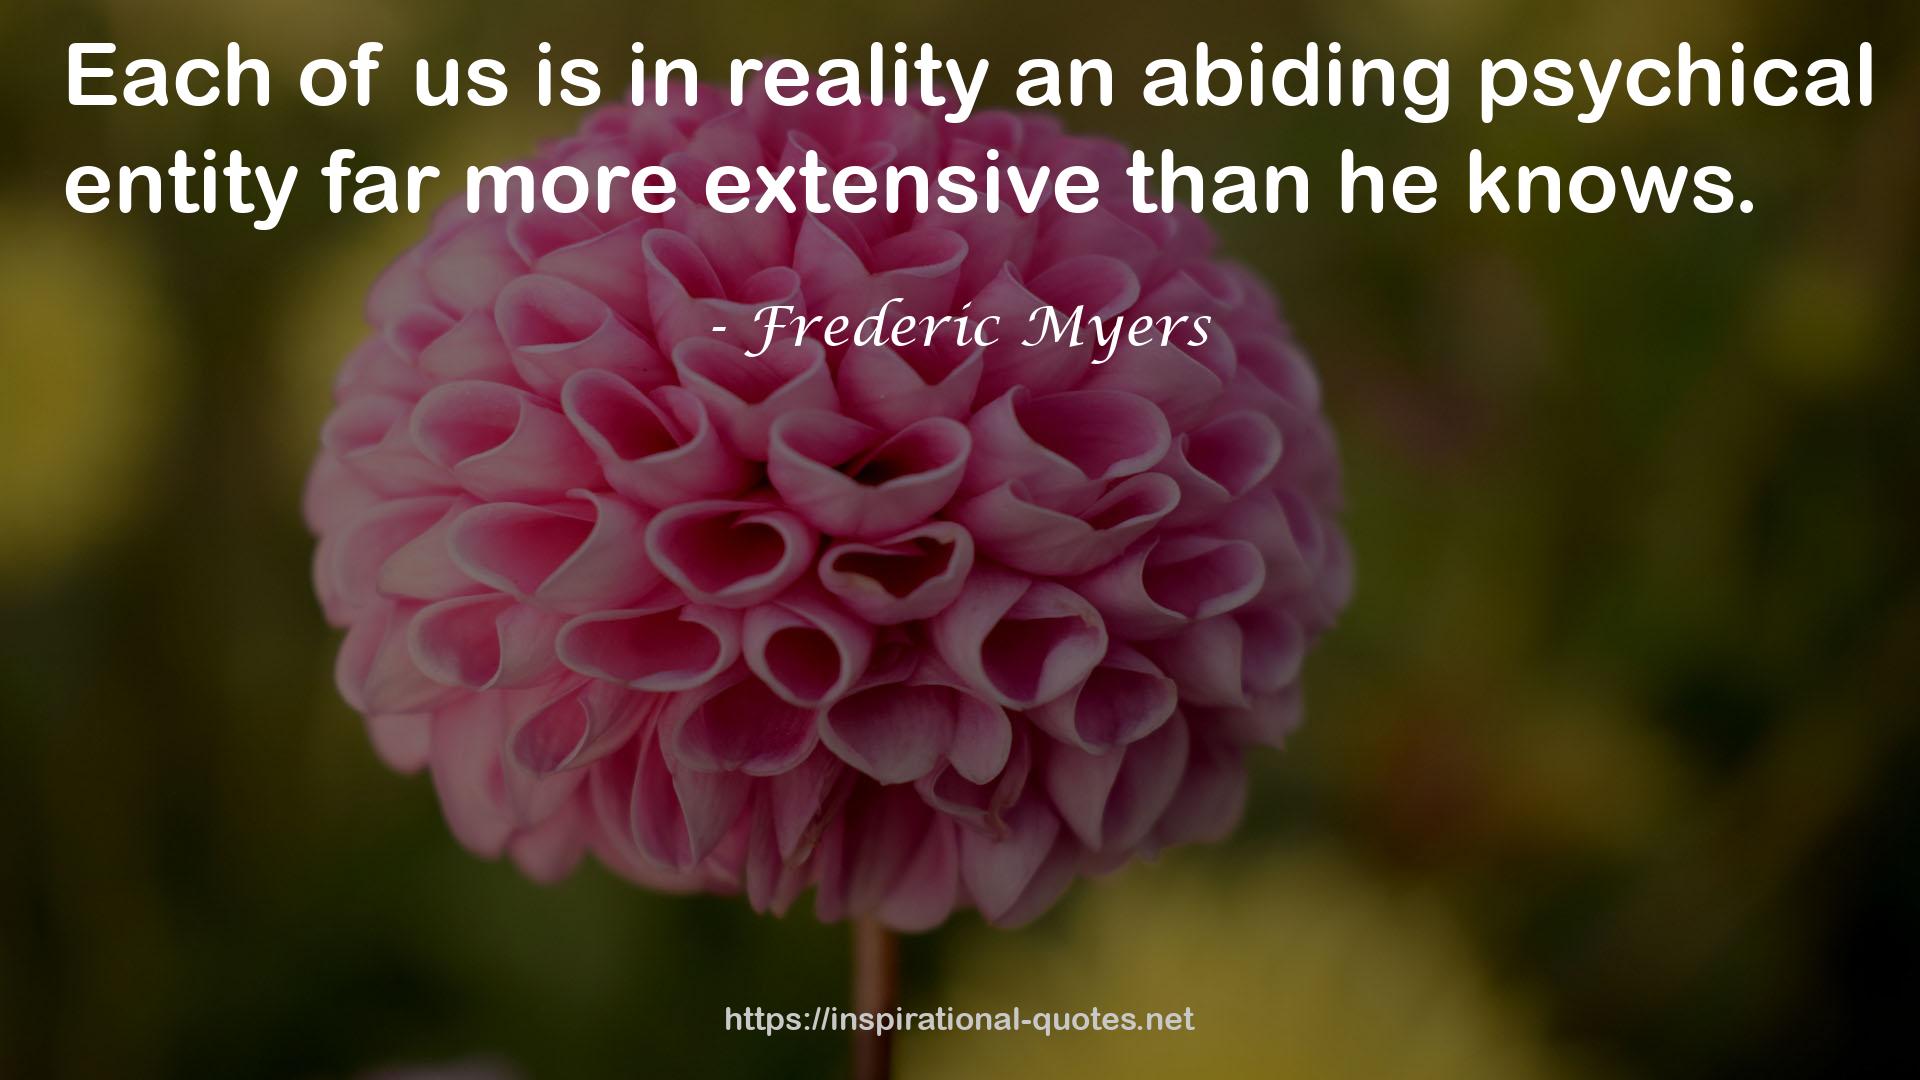 Frederic Myers QUOTES